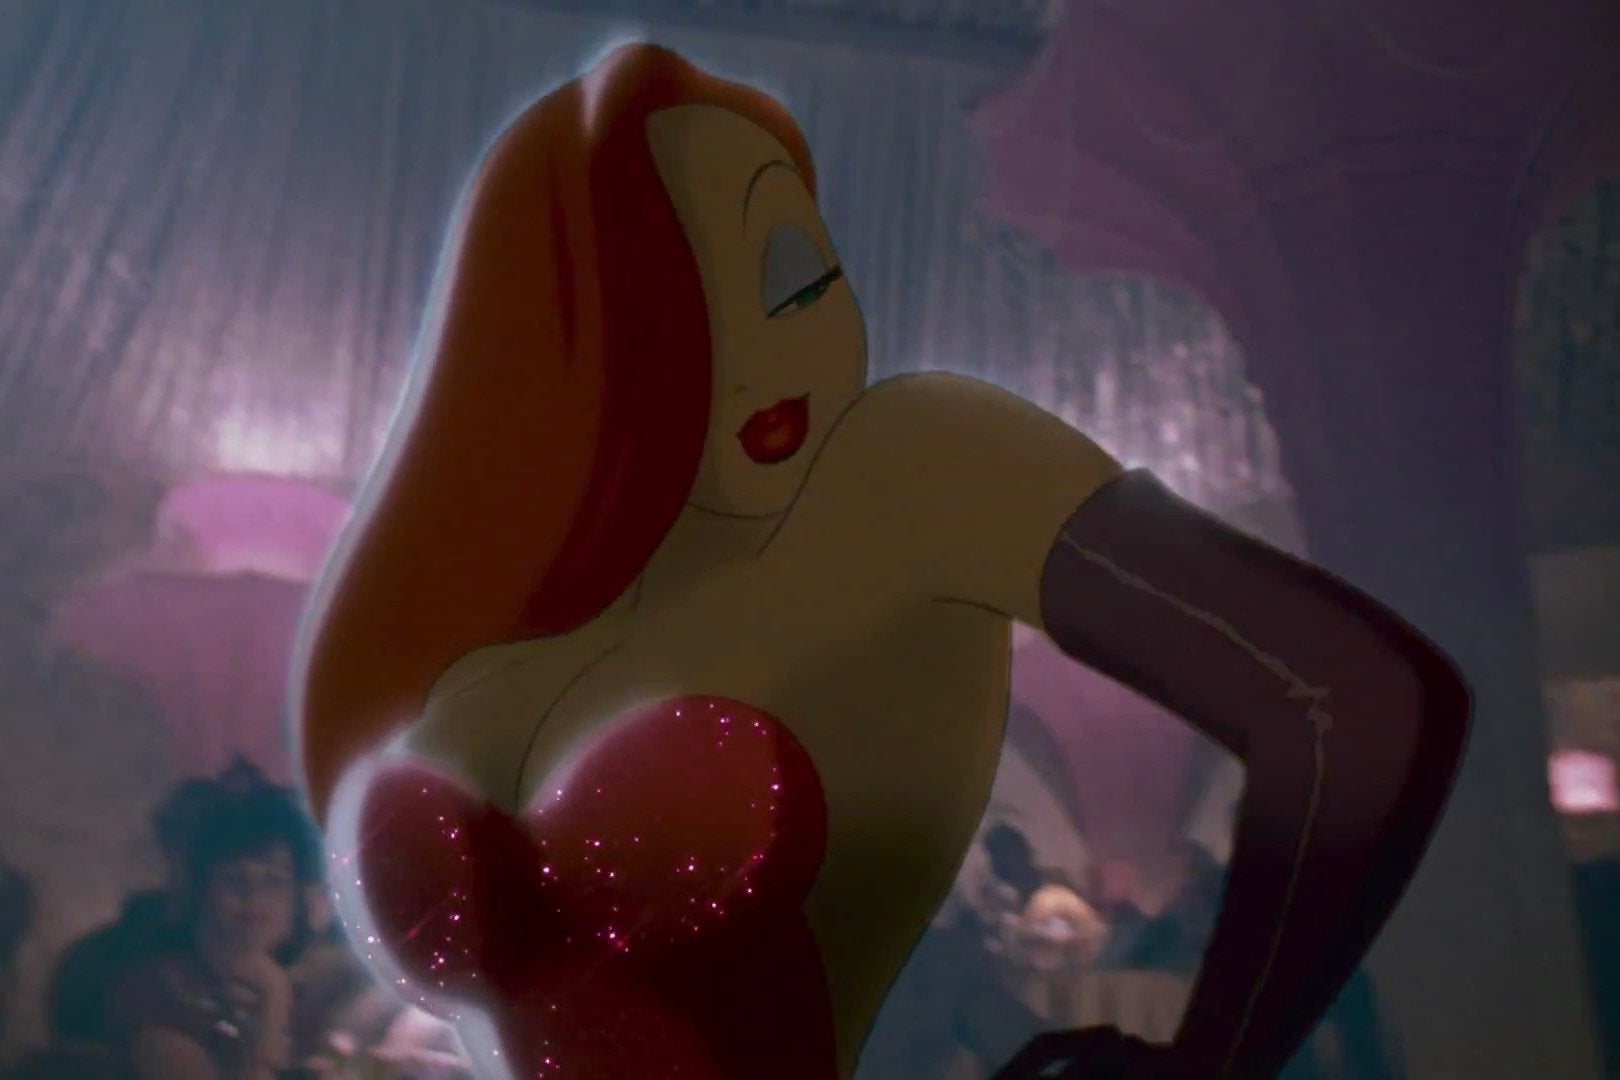 alex wiessner recommends Jessica Rabbit Pictures